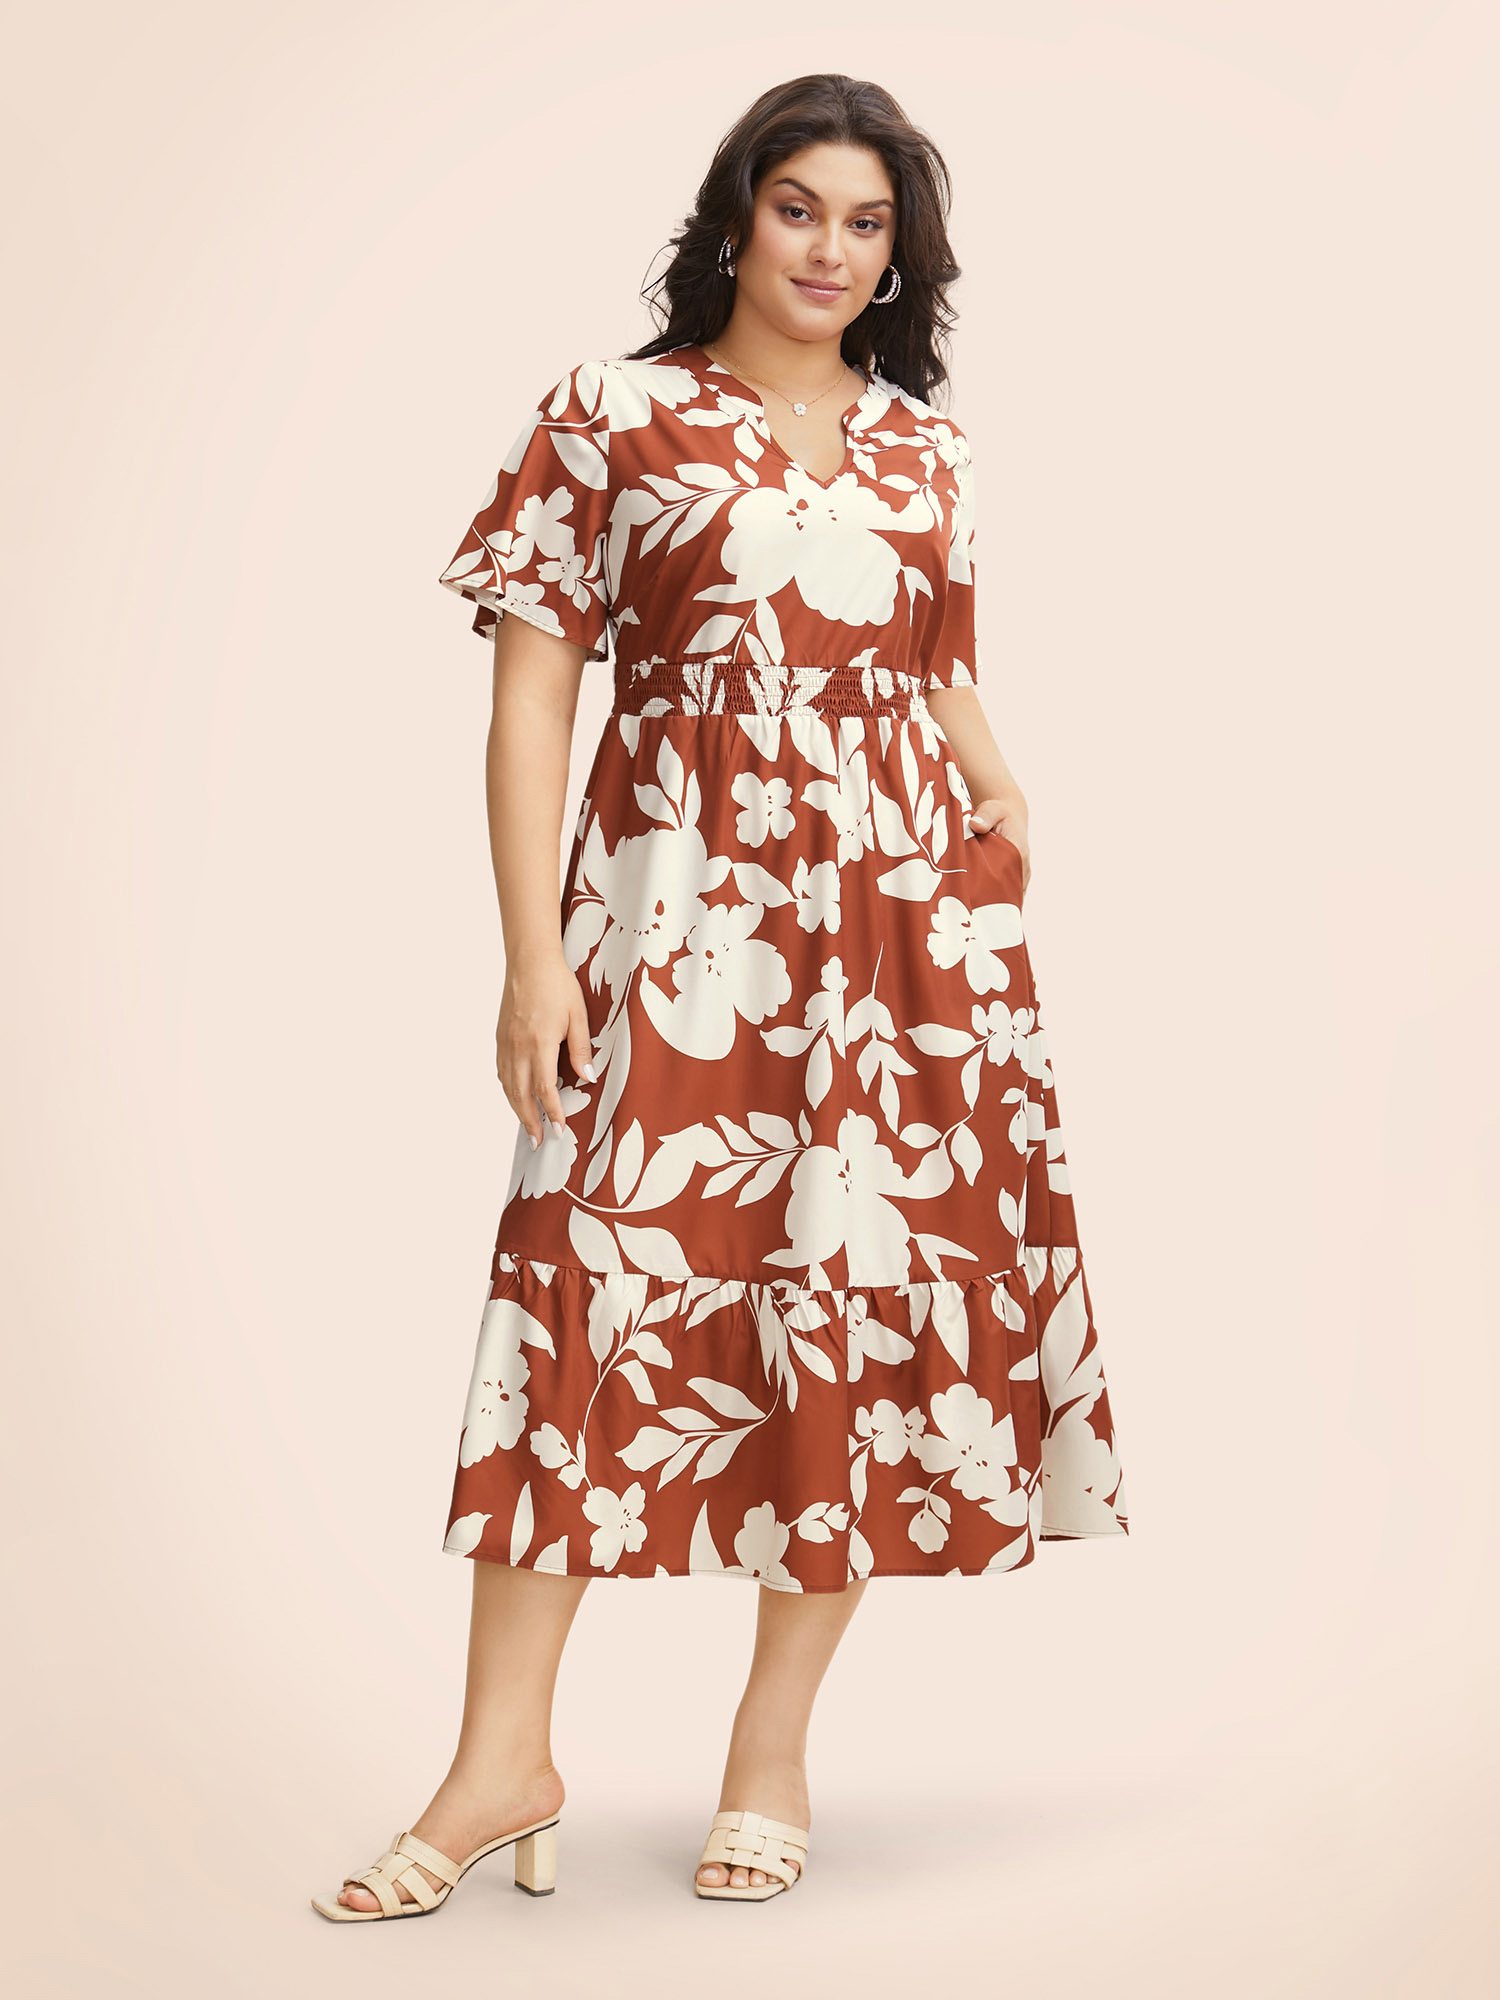 

Plus Size Silhouette Floral Print Shirred Ruffles Dress Browncoffeecolor Women Elegant Shirred Notched collar Short sleeve Curvy BloomChic